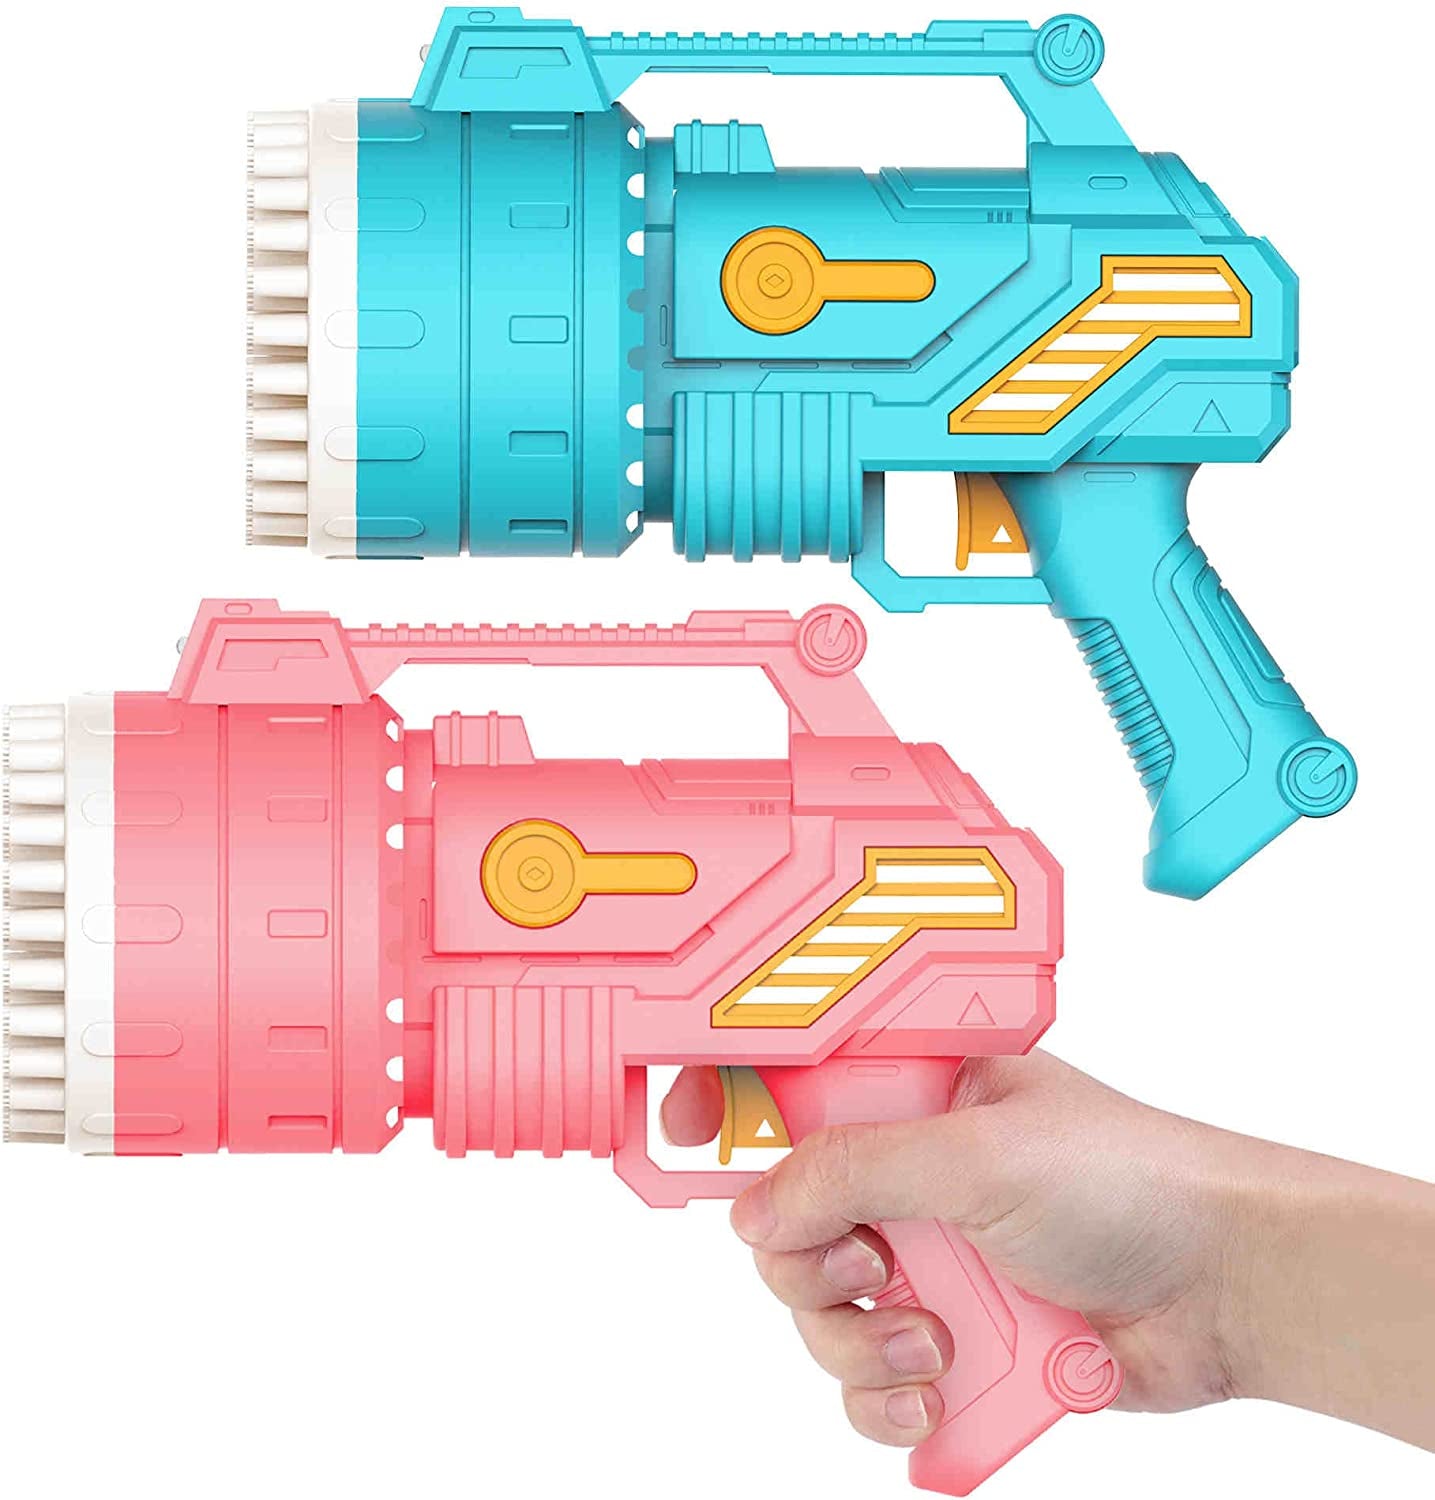 Set of 2 Bubble Machine Guns: 69-Hole Design with LED Light - Includes 8 Bottles of Bubble Solution for Kids' Outdoor Activities